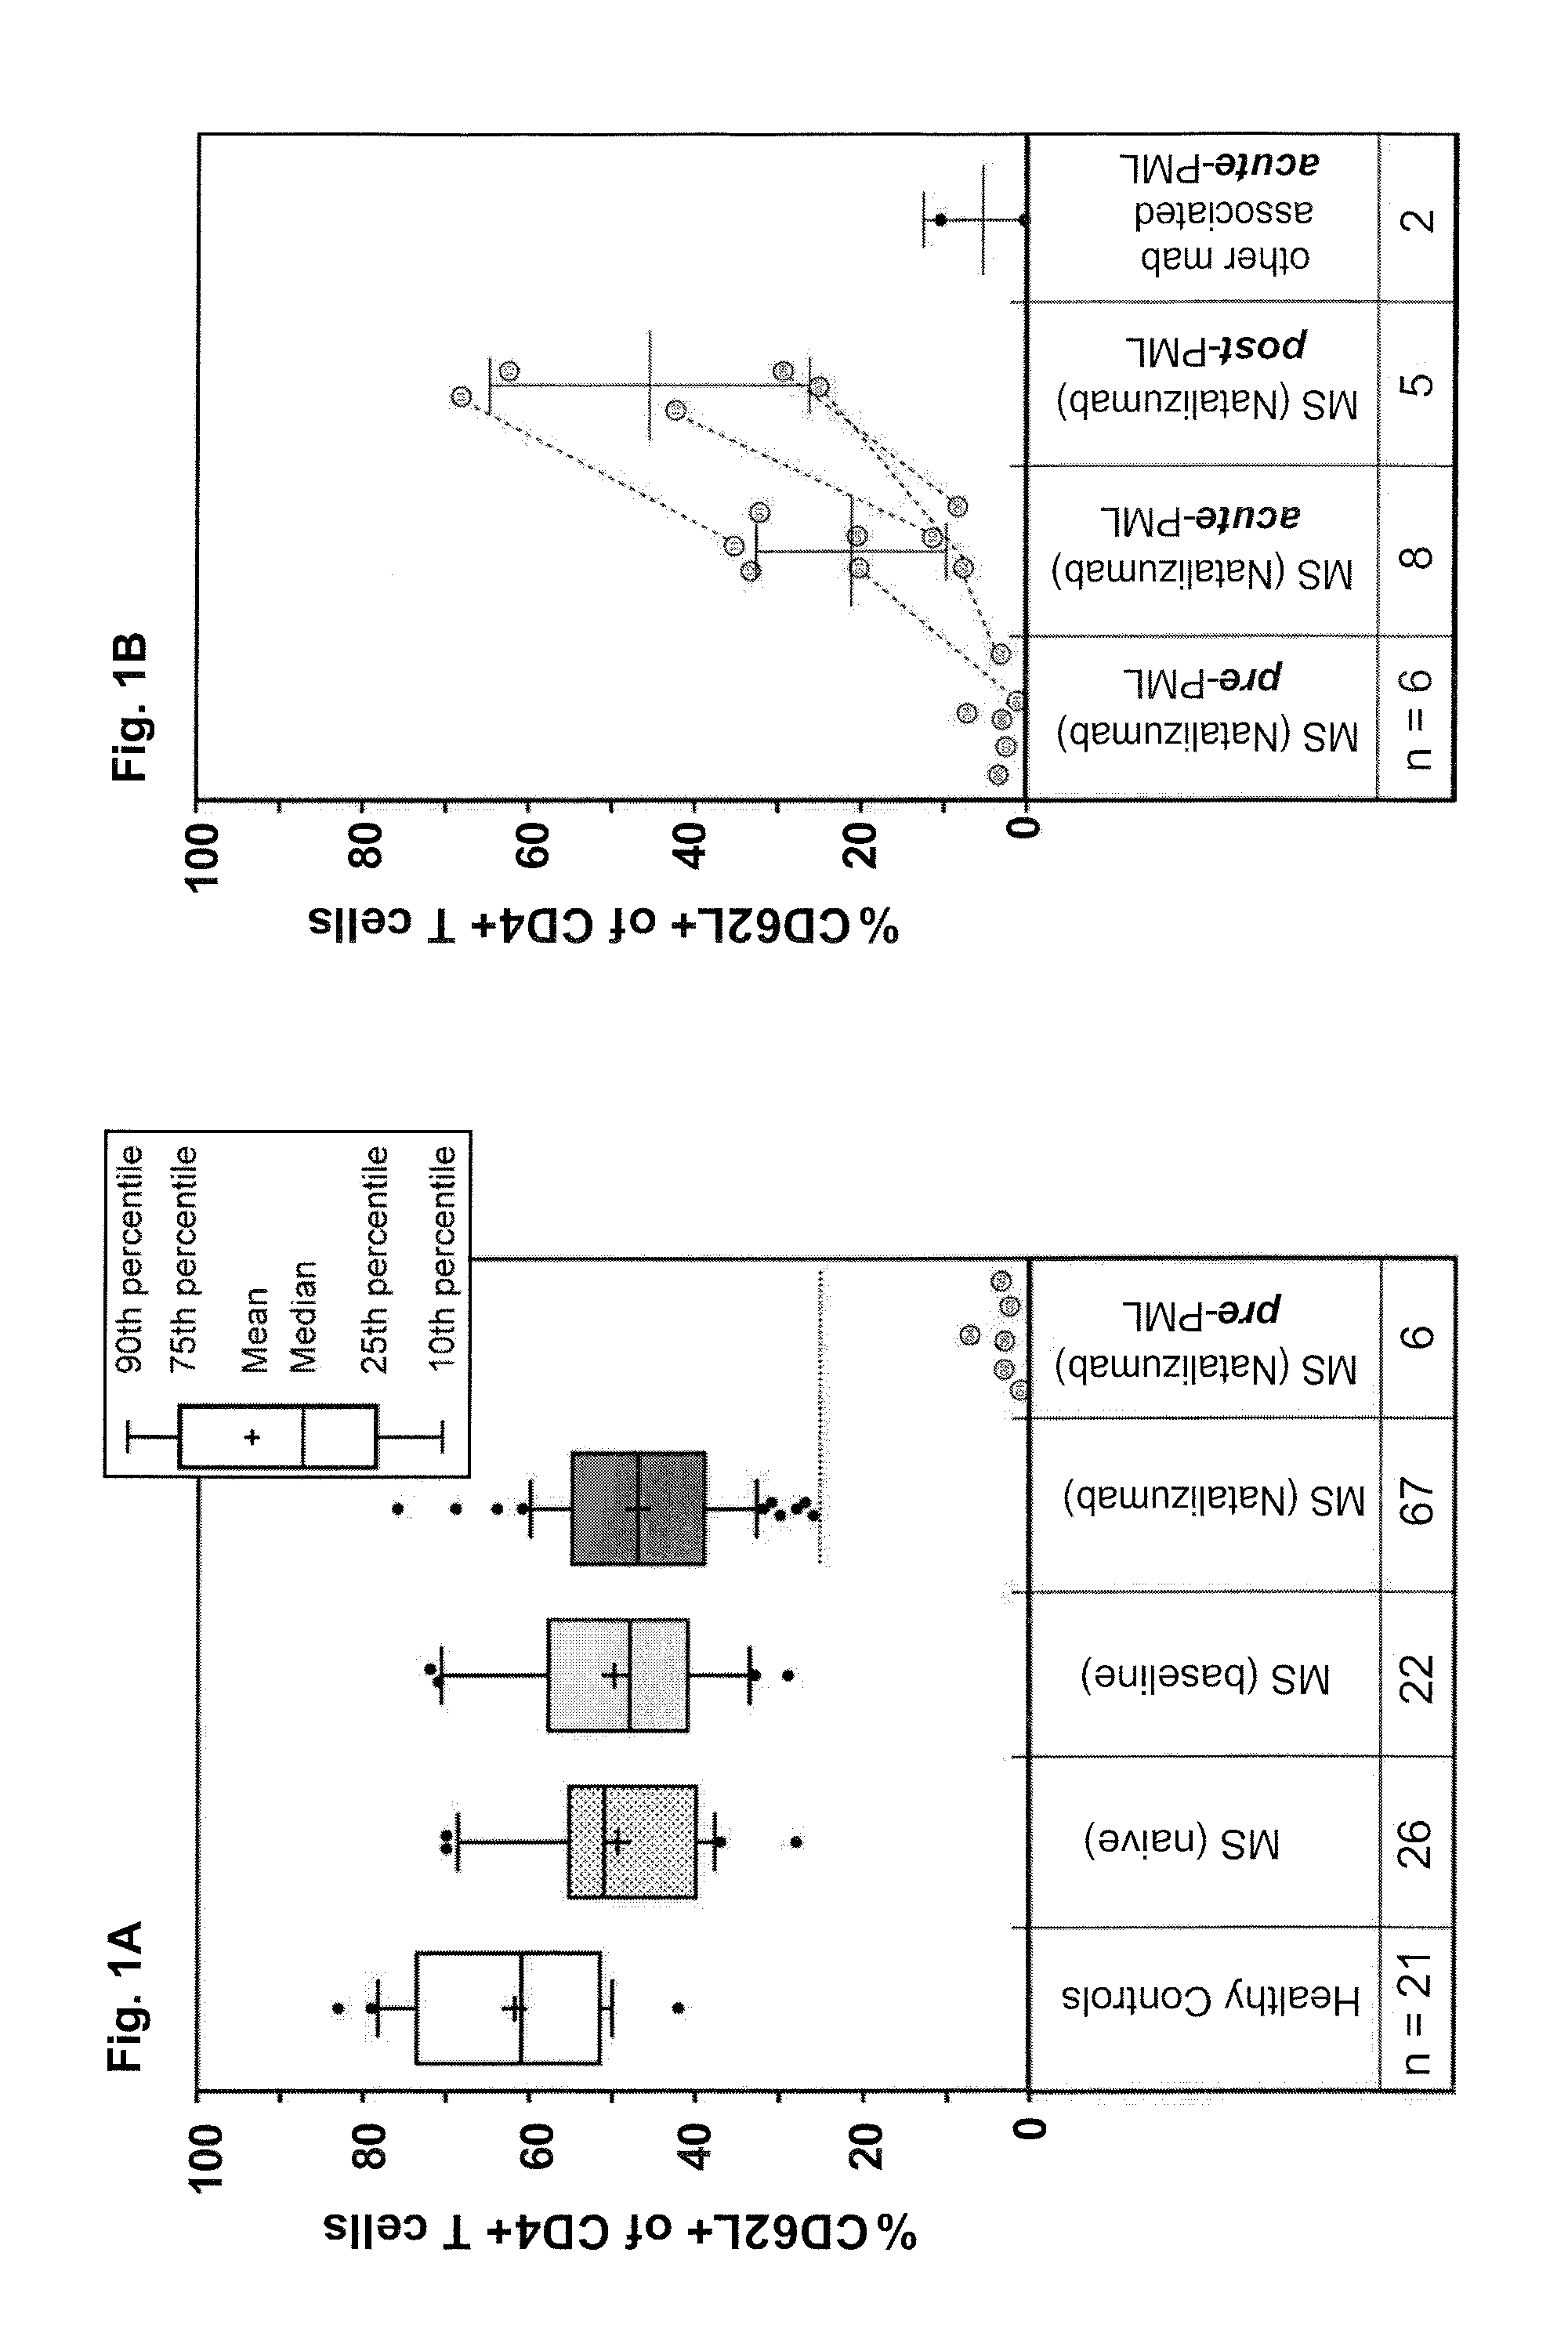 Methods or risk assessment of pml and related apparatus